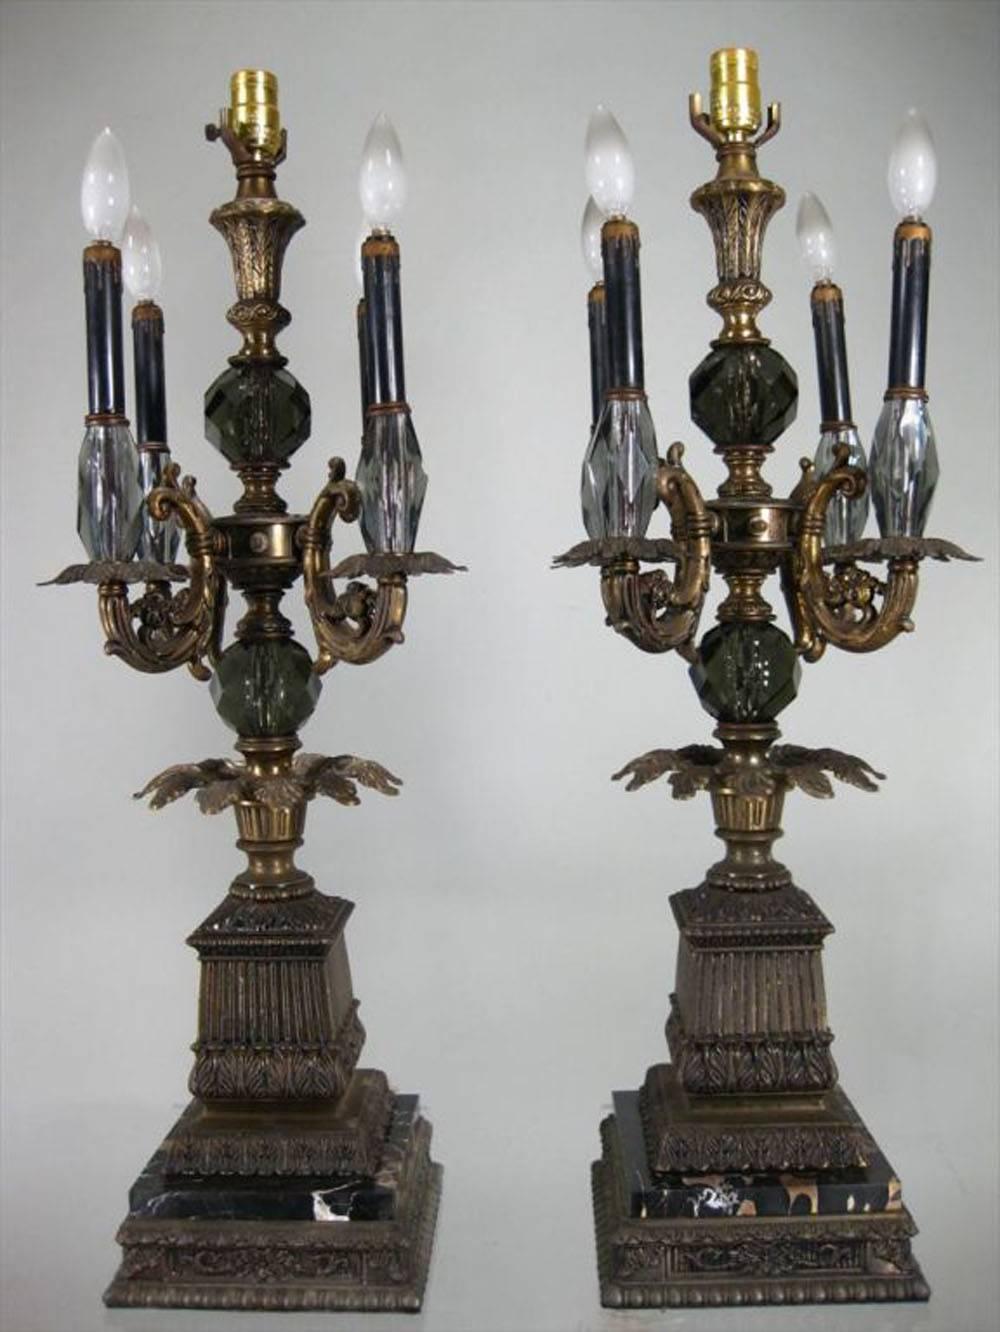 Large glass and metal lamps from Italy. Ornate with rich combination of materials.